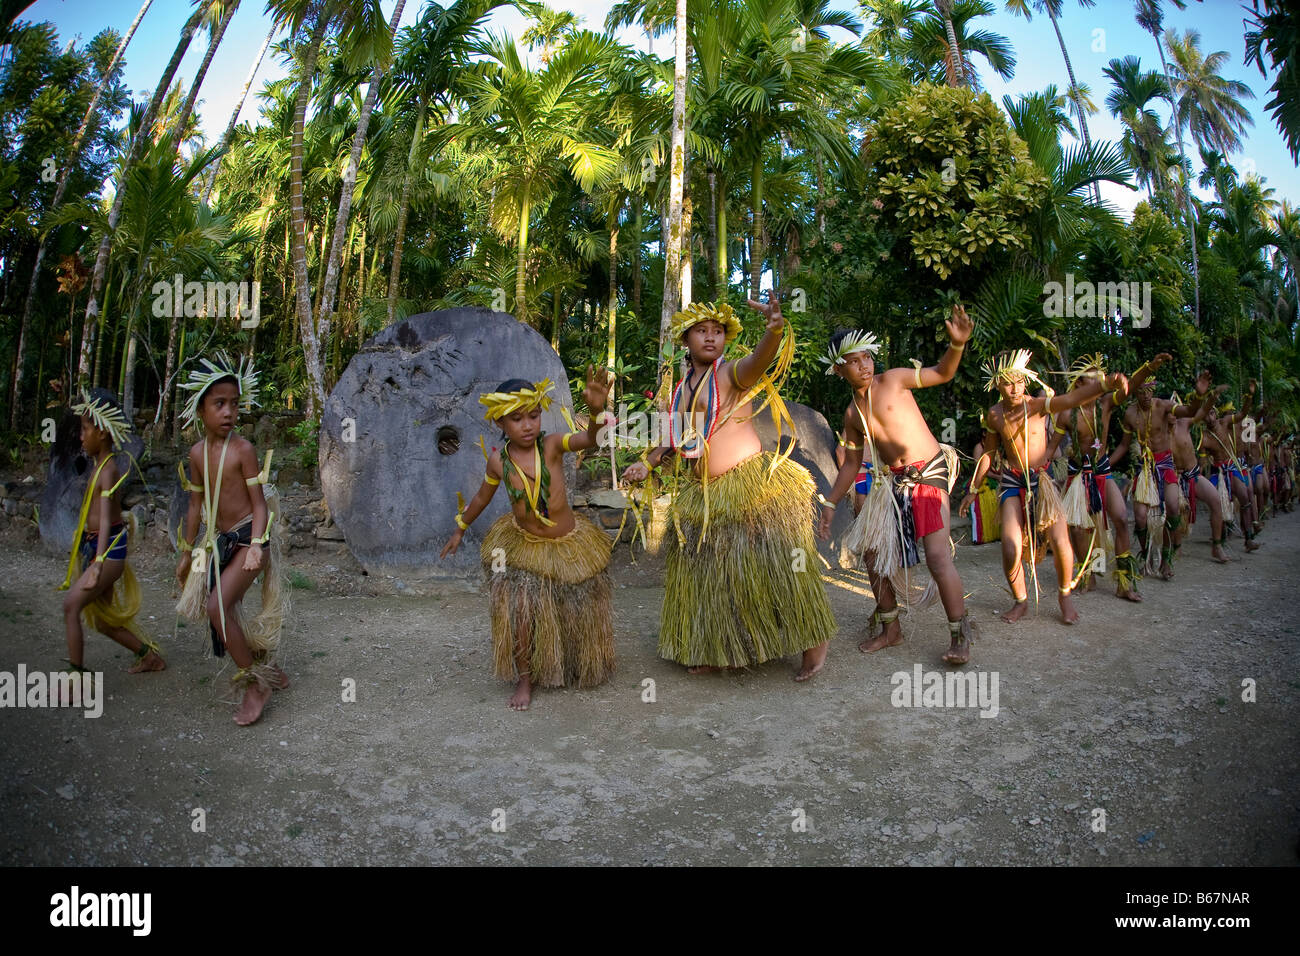 Culture of Yap People Micronesia Pacific Ocean Palau Stock Photo